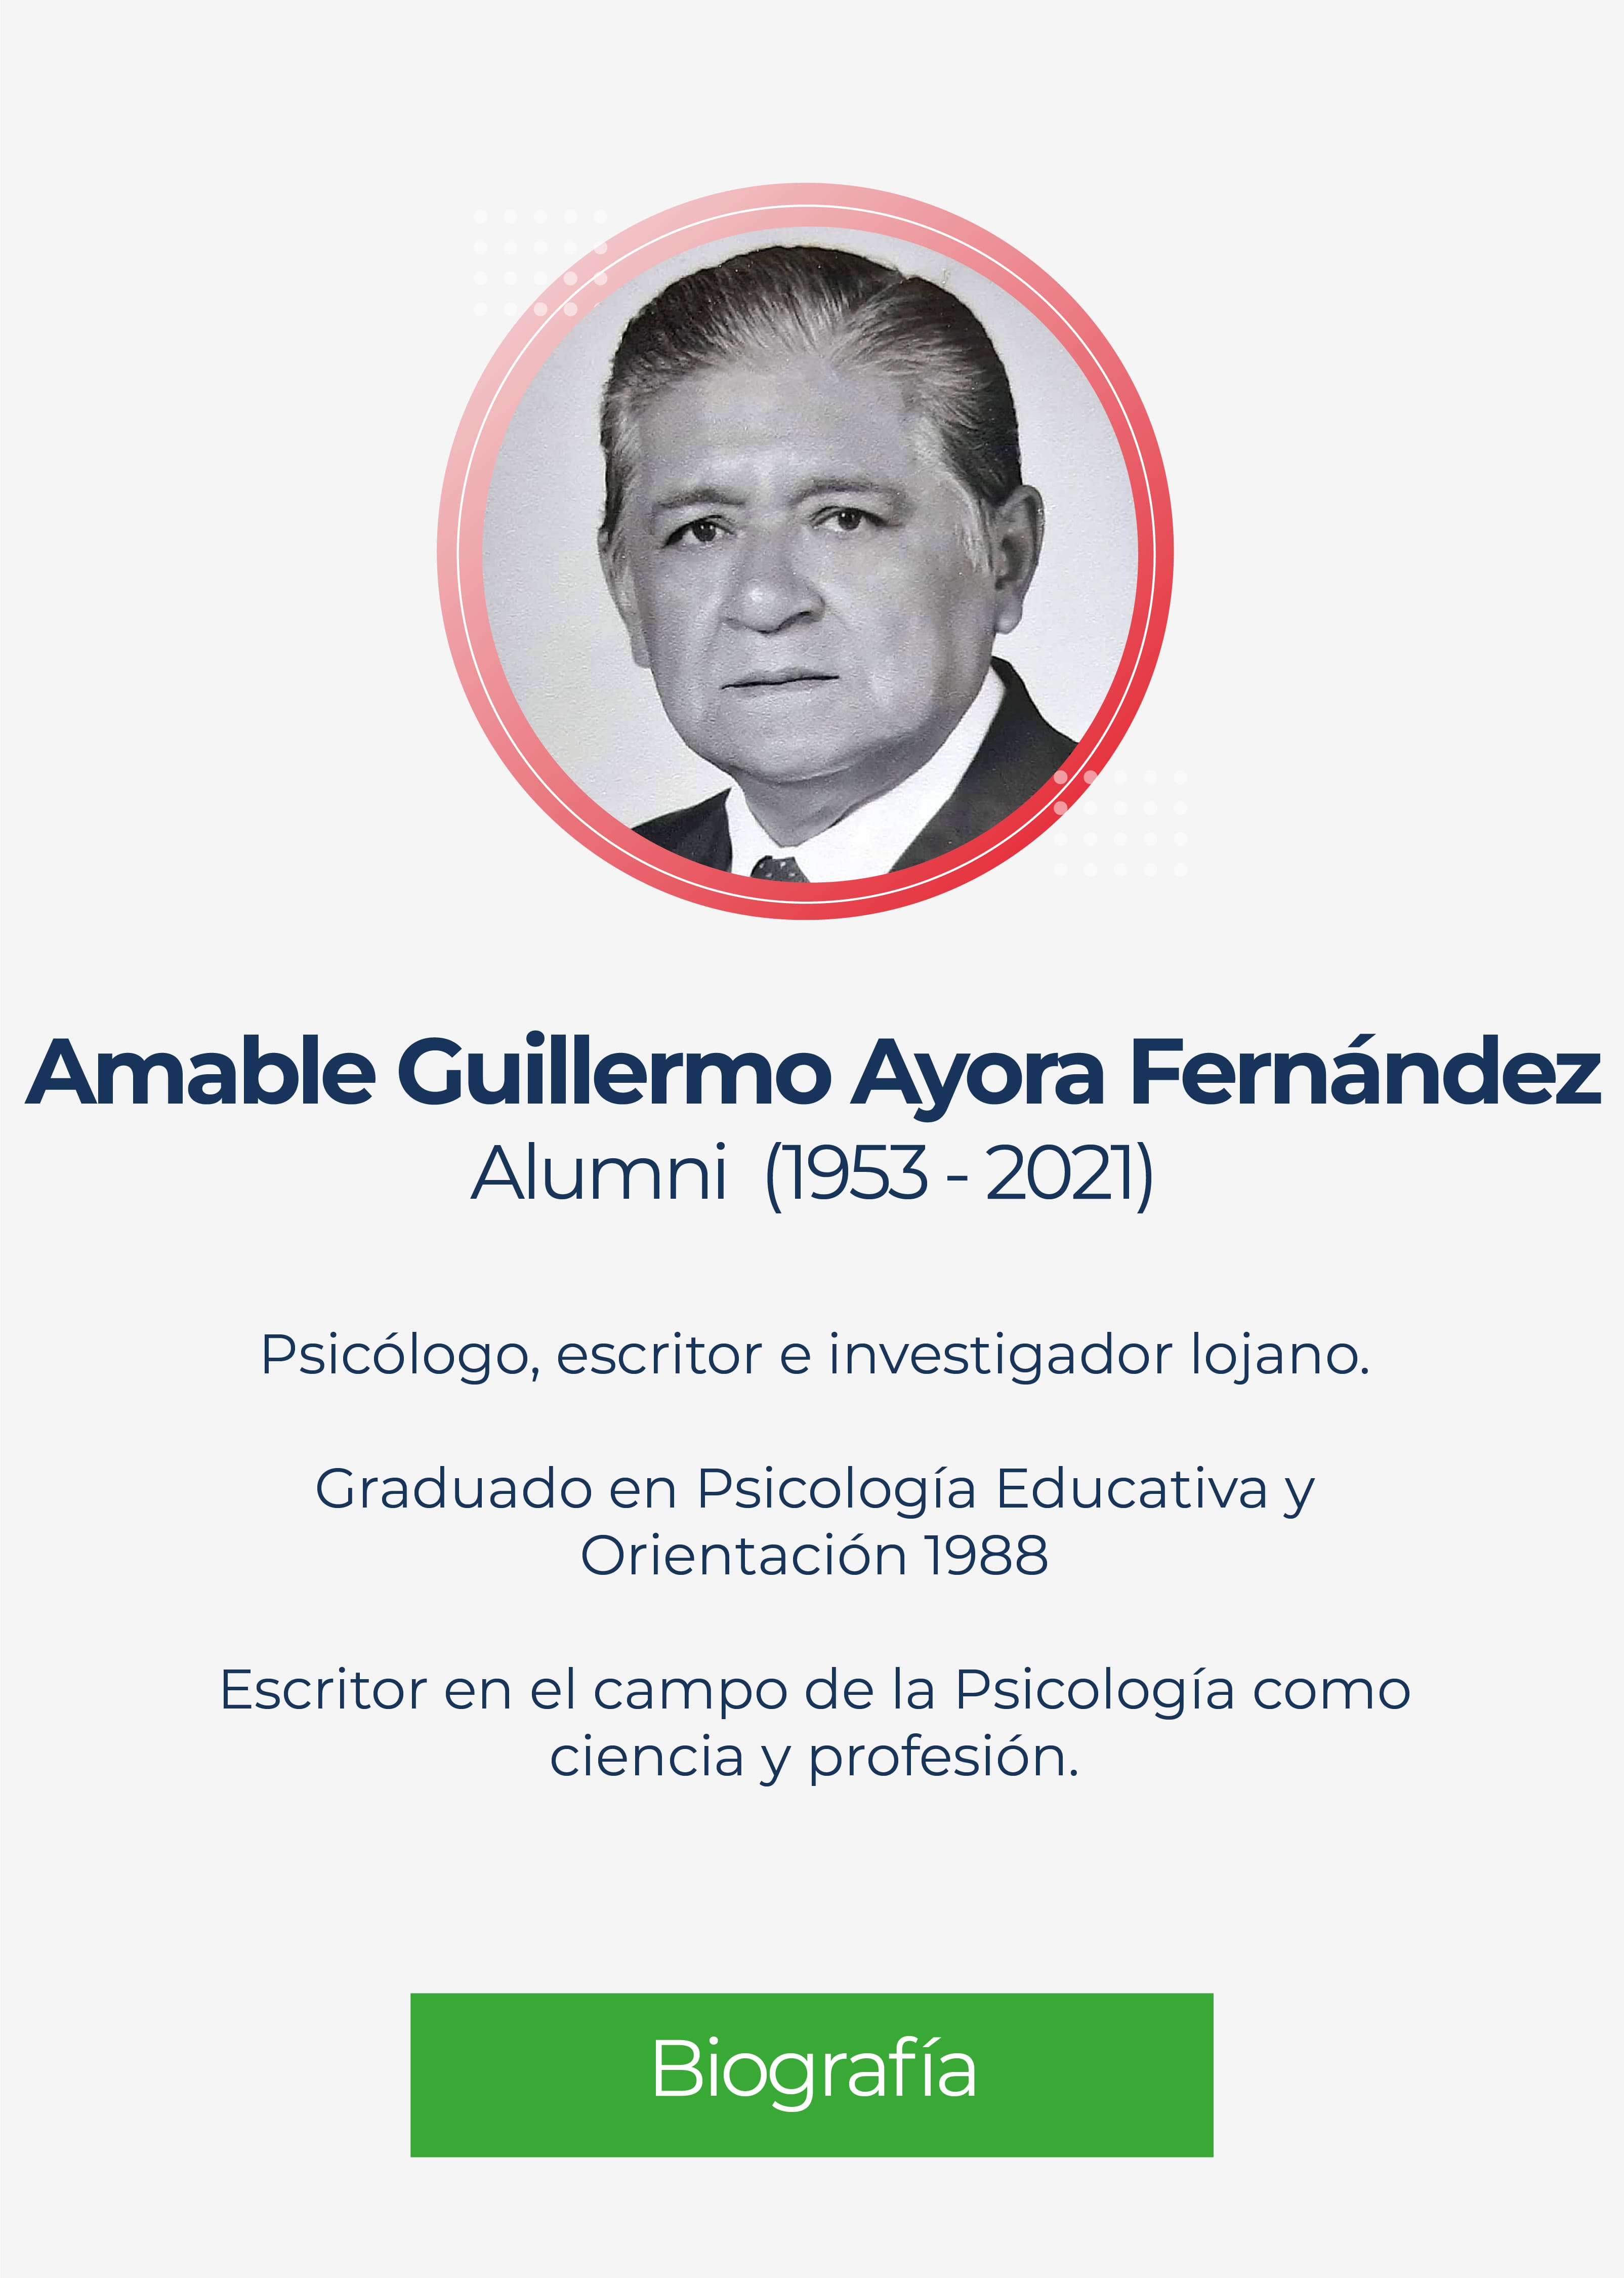 Amable Guillermo Ayora Fernández